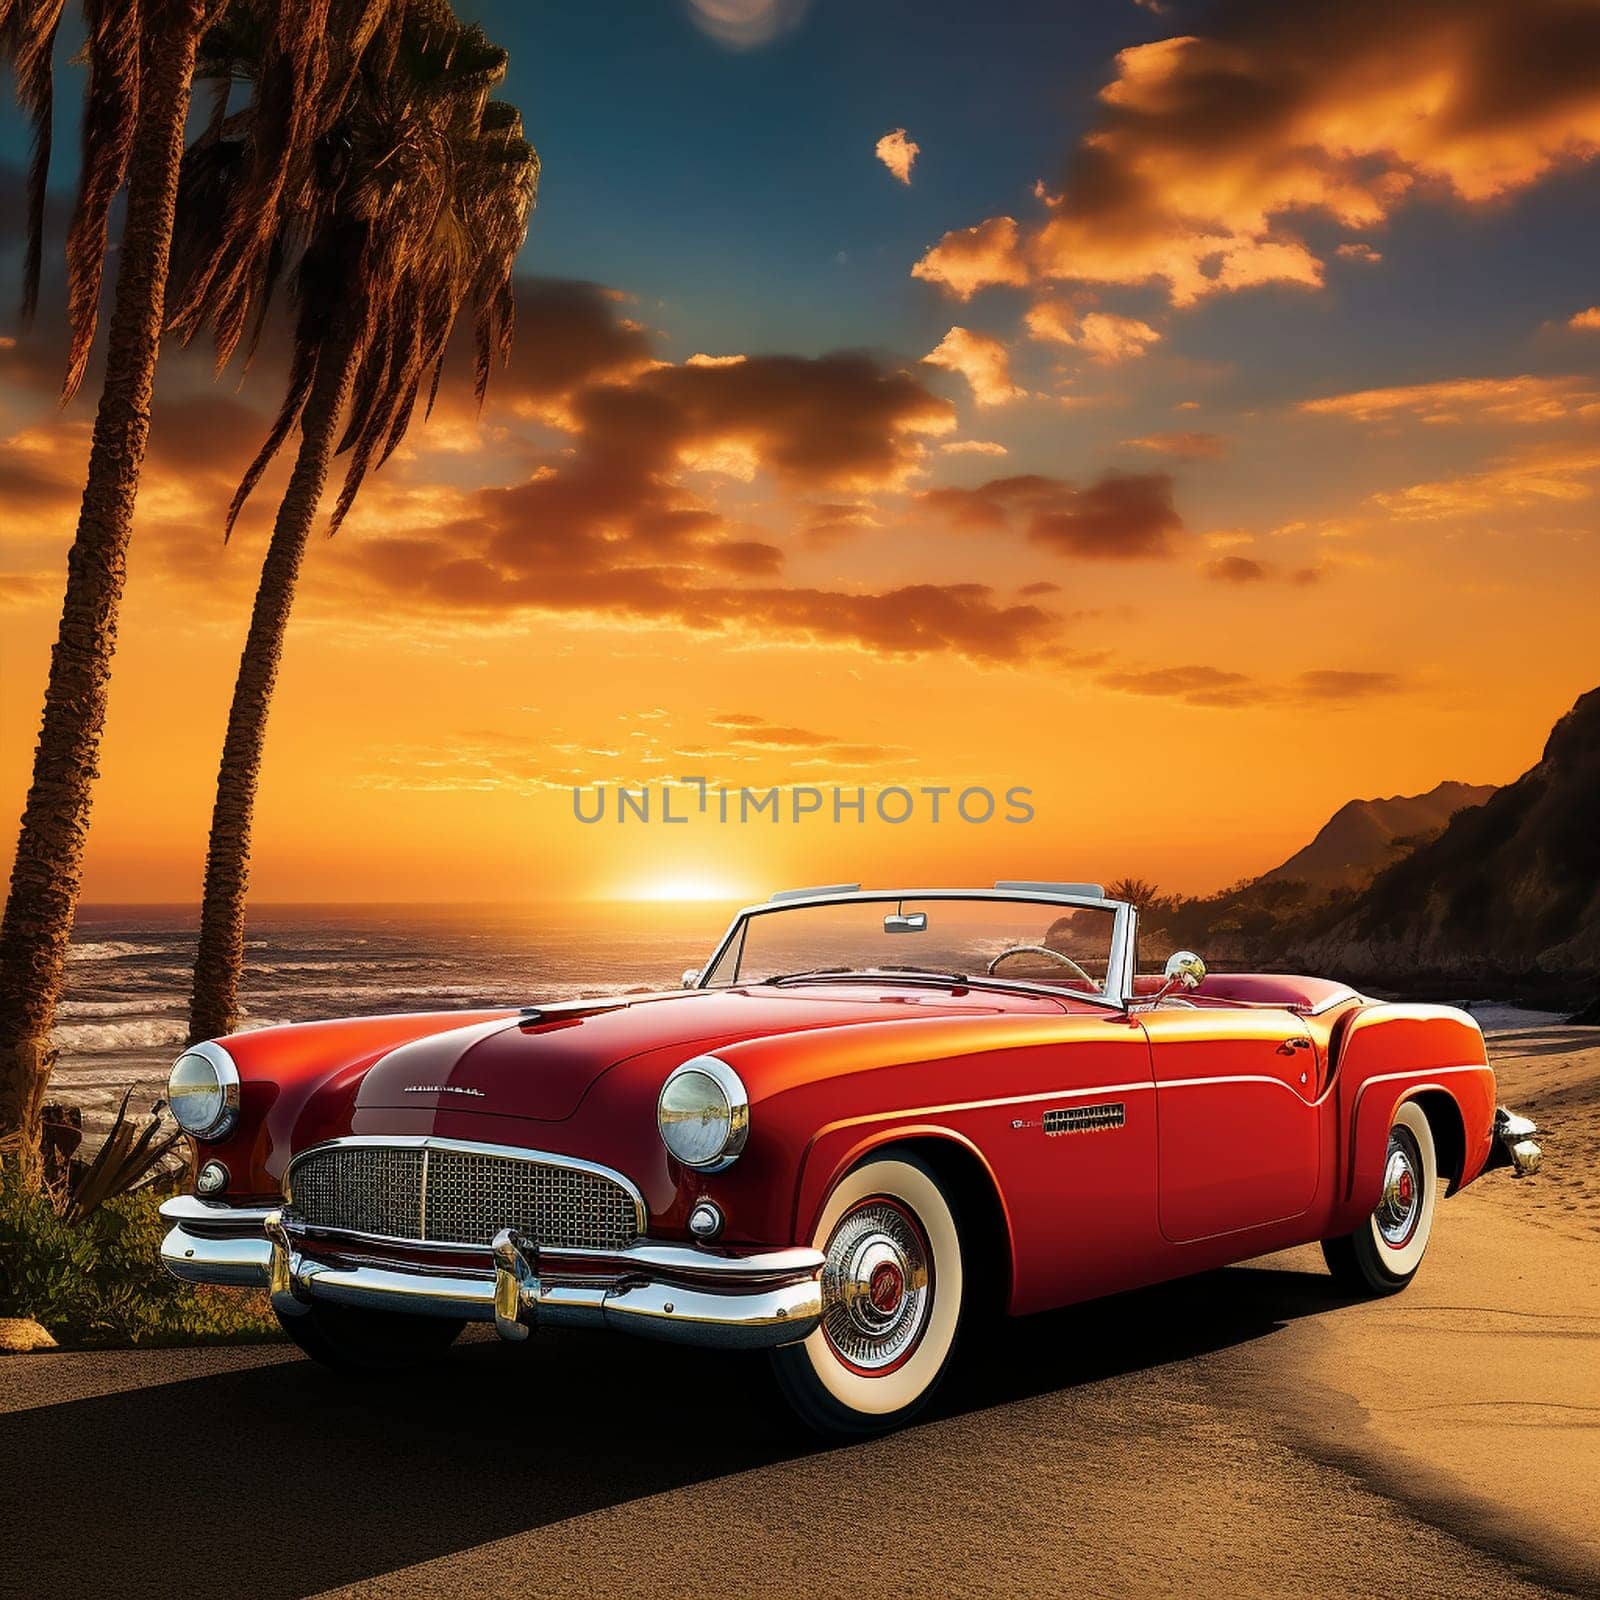 Step into the enchanting era of classic automobiles with this captivating image titled 'The Golden Era: Admiring Vintage Cars'. Transport yourself to a timeless scene that pays homage to the undeniable allure of vintage cars. Marvel at a meticulously restored 1950s convertible effortlessly gliding along a scenic coastal road against a picturesque sunset backdrop. The vibrant hues of the summer sky seamlessly blend with the gleaming exterior of the car, exuding an air of nostalgia and adventure. Witness a couple, elegantly dressed in vintage attire, enjoying a romantic drive along the coast, their smiles reflecting the carefree spirit of the era. This image embraces the aesthetic of the golden age of vintage cars, inviting viewers to experience an era brimming with elegance, style, and the joy of open-road exploration.